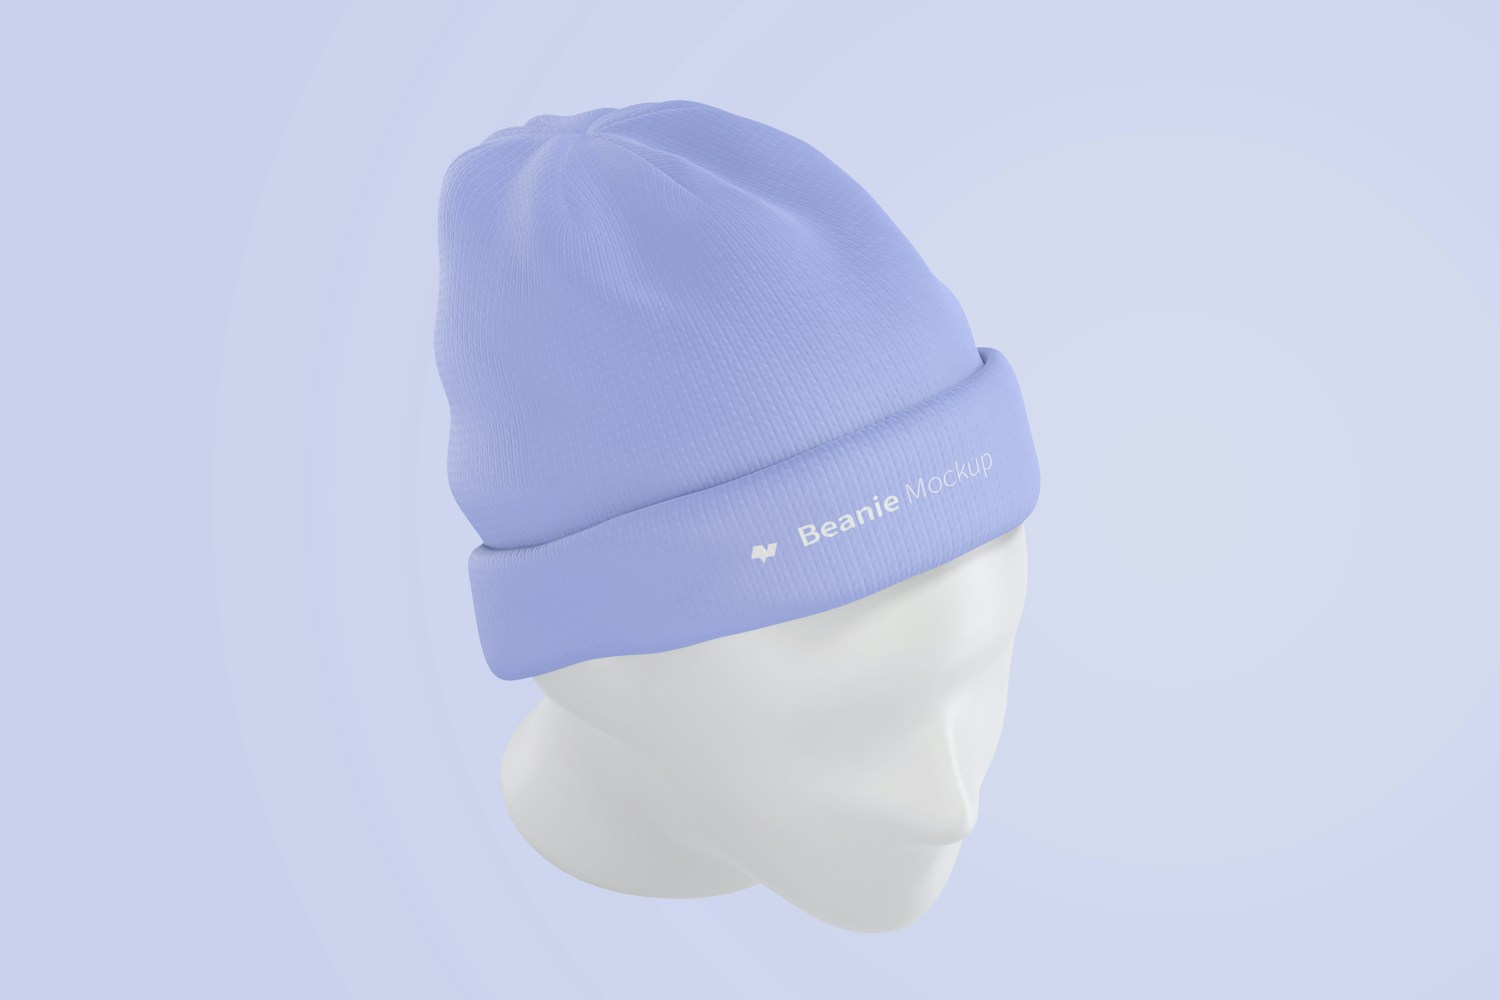 Beanie with Head Mockup, Perspective Top View